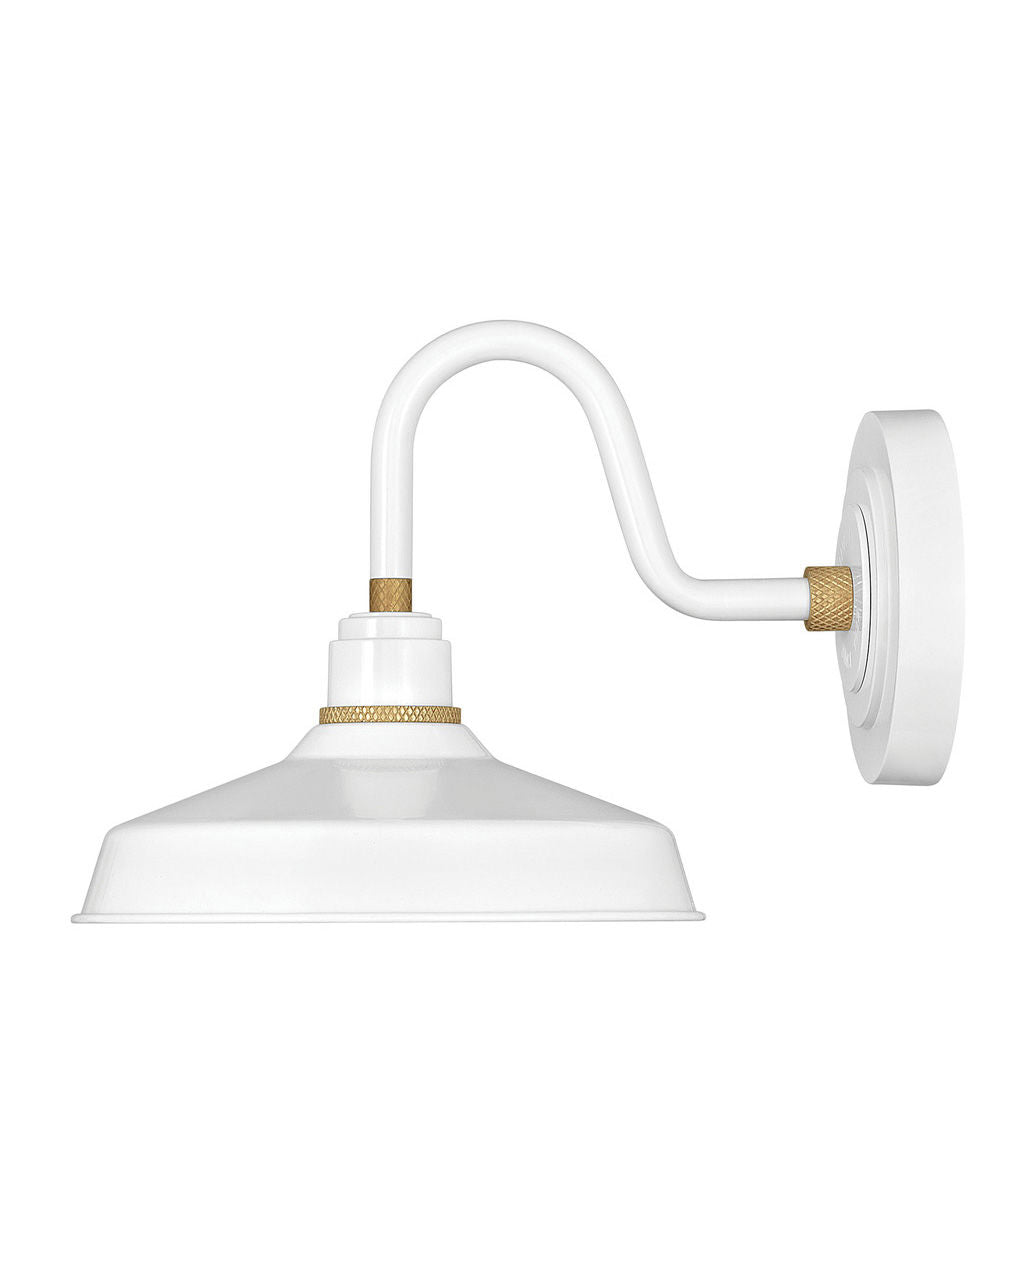 OUTDOOR FOUNDRY CLASSIC Gooseneck Barn Light Outdoor l Wall Hinkley Gloss White 13.25x9.5x9.25 